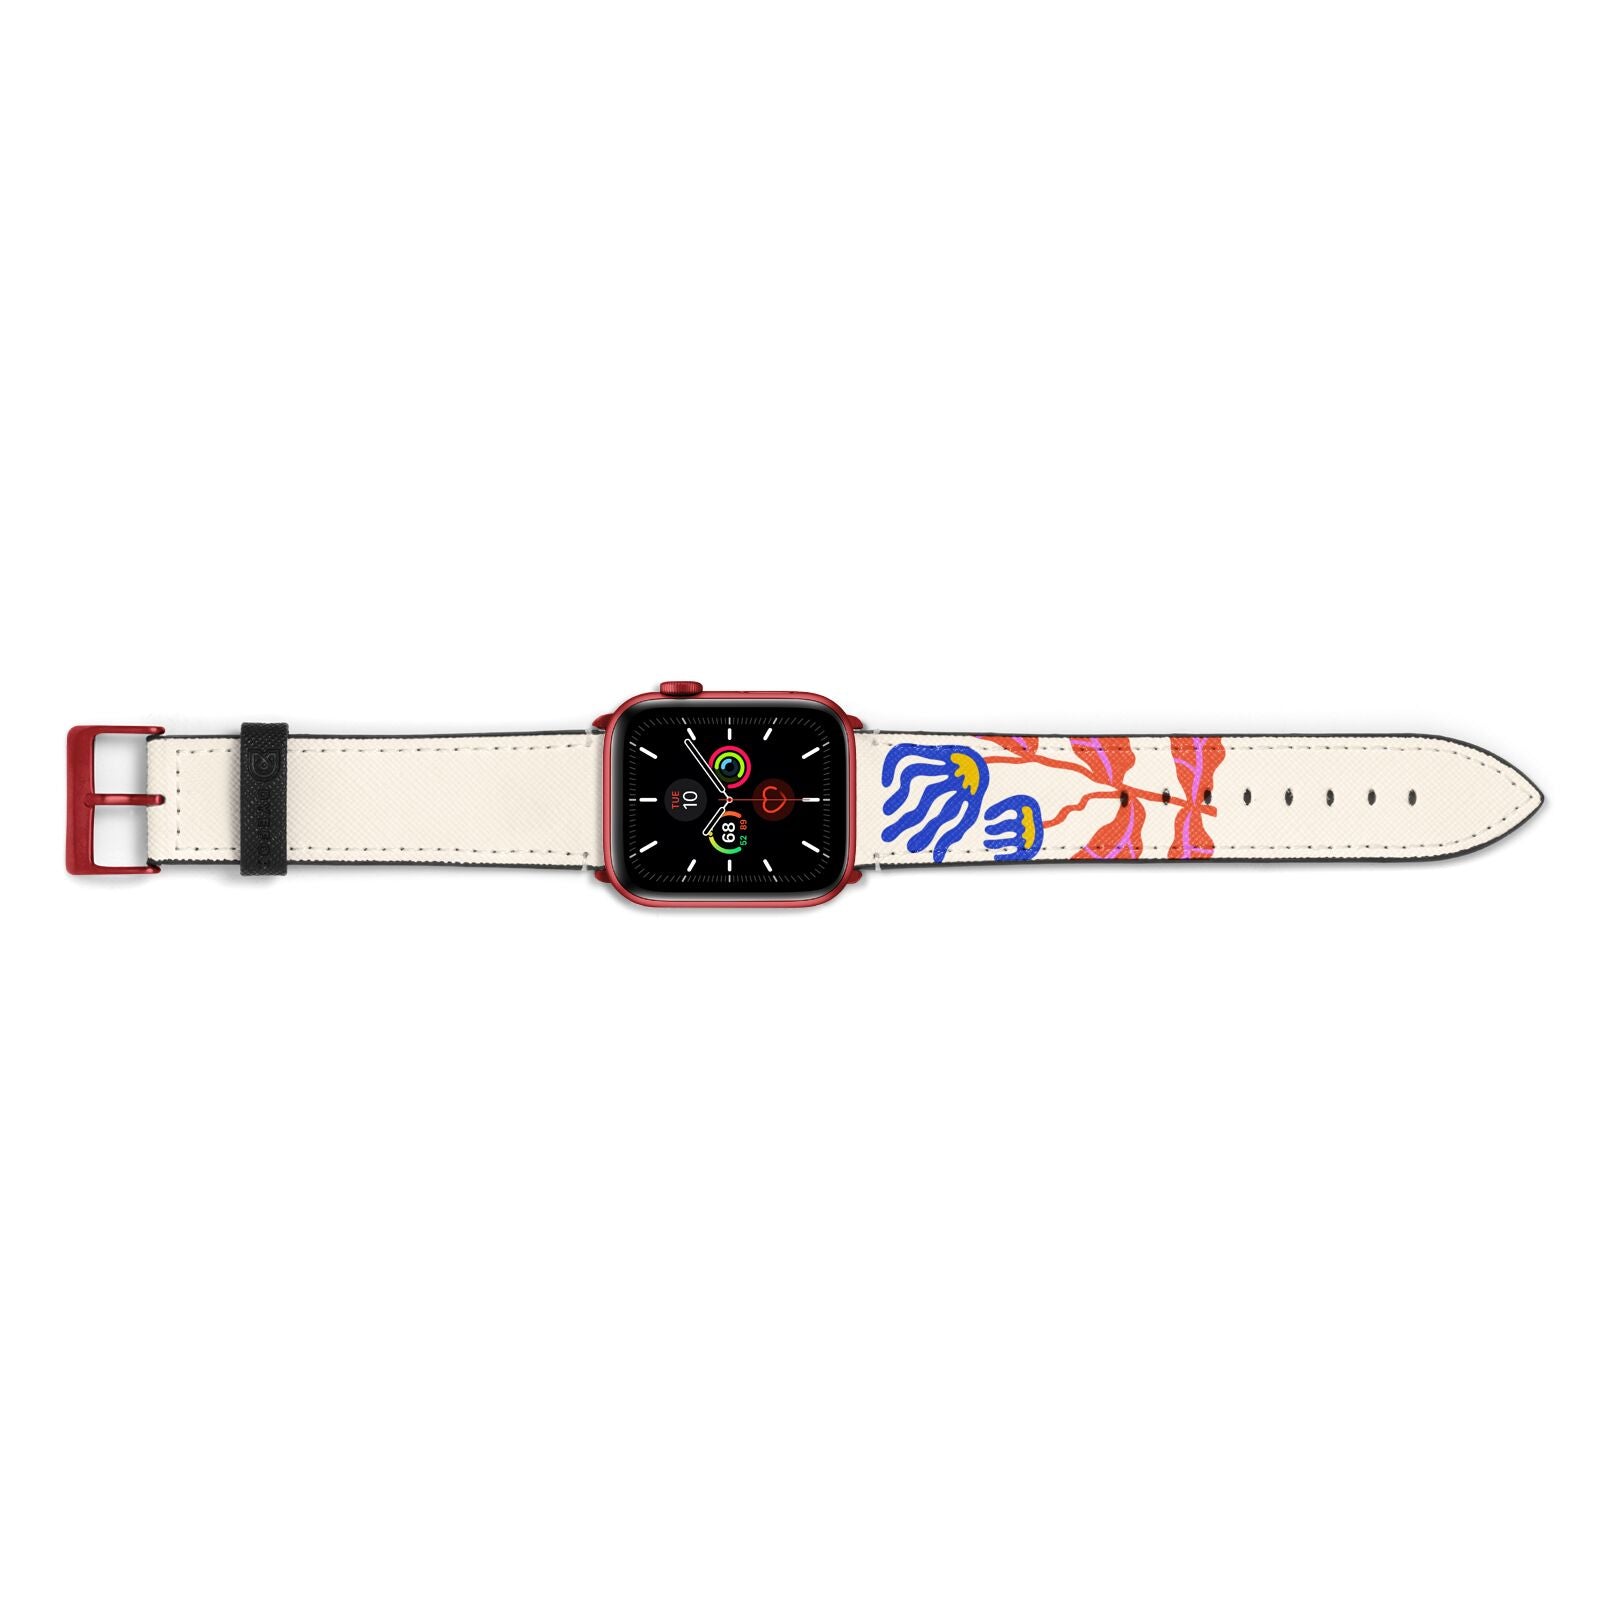 Contemporary Floral Apple Watch Strap Landscape Image Red Hardware